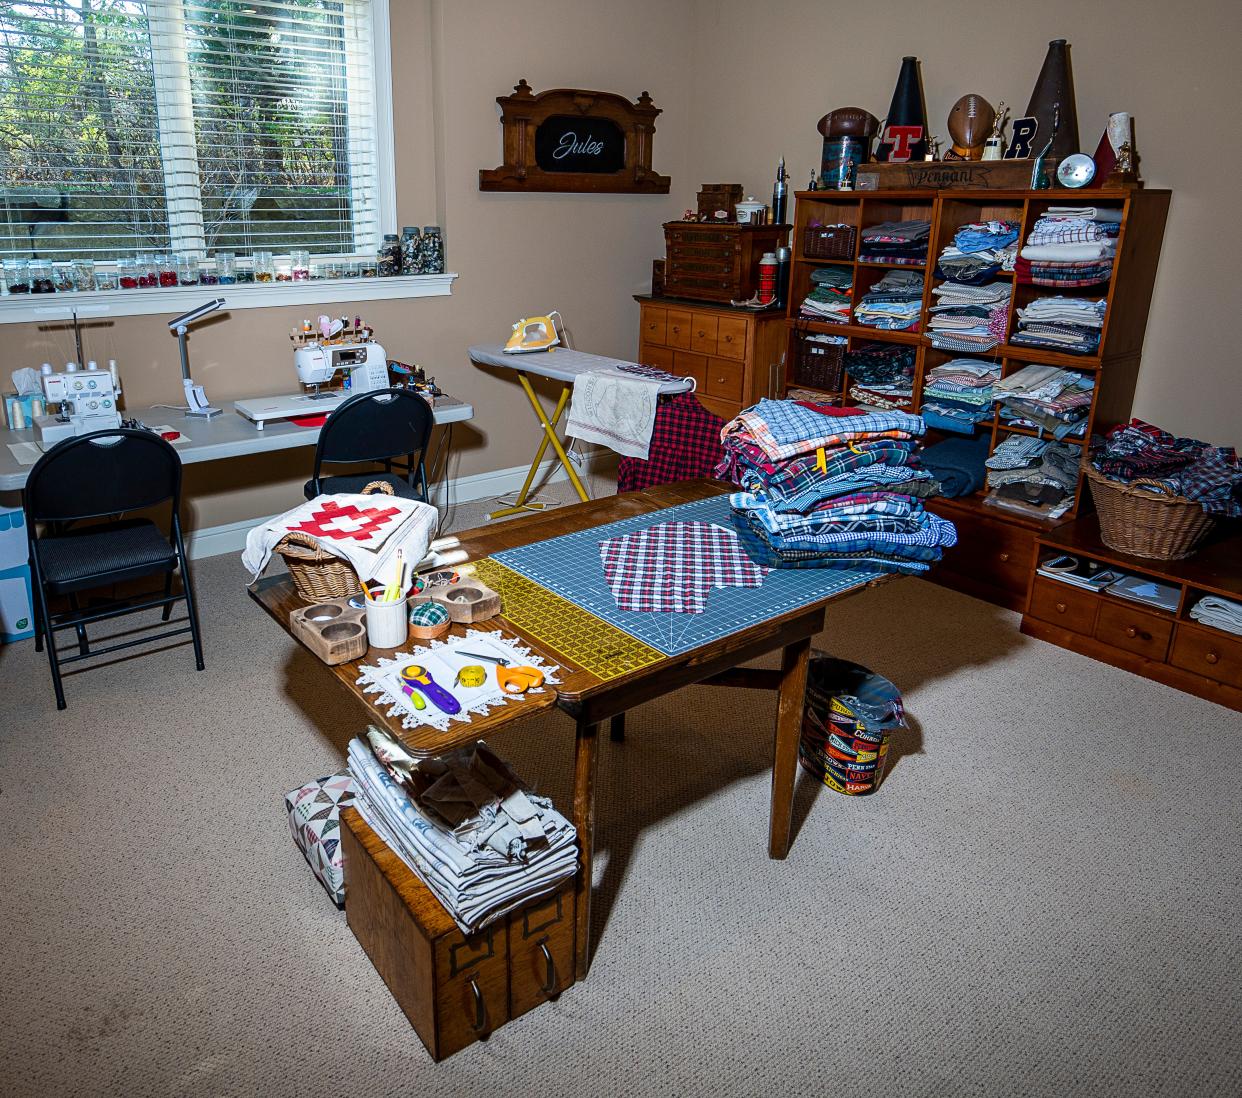 Julie Hunt's work room, where she makes decorative pillows out of a variety of fabrics, including varsity letters and pennants.